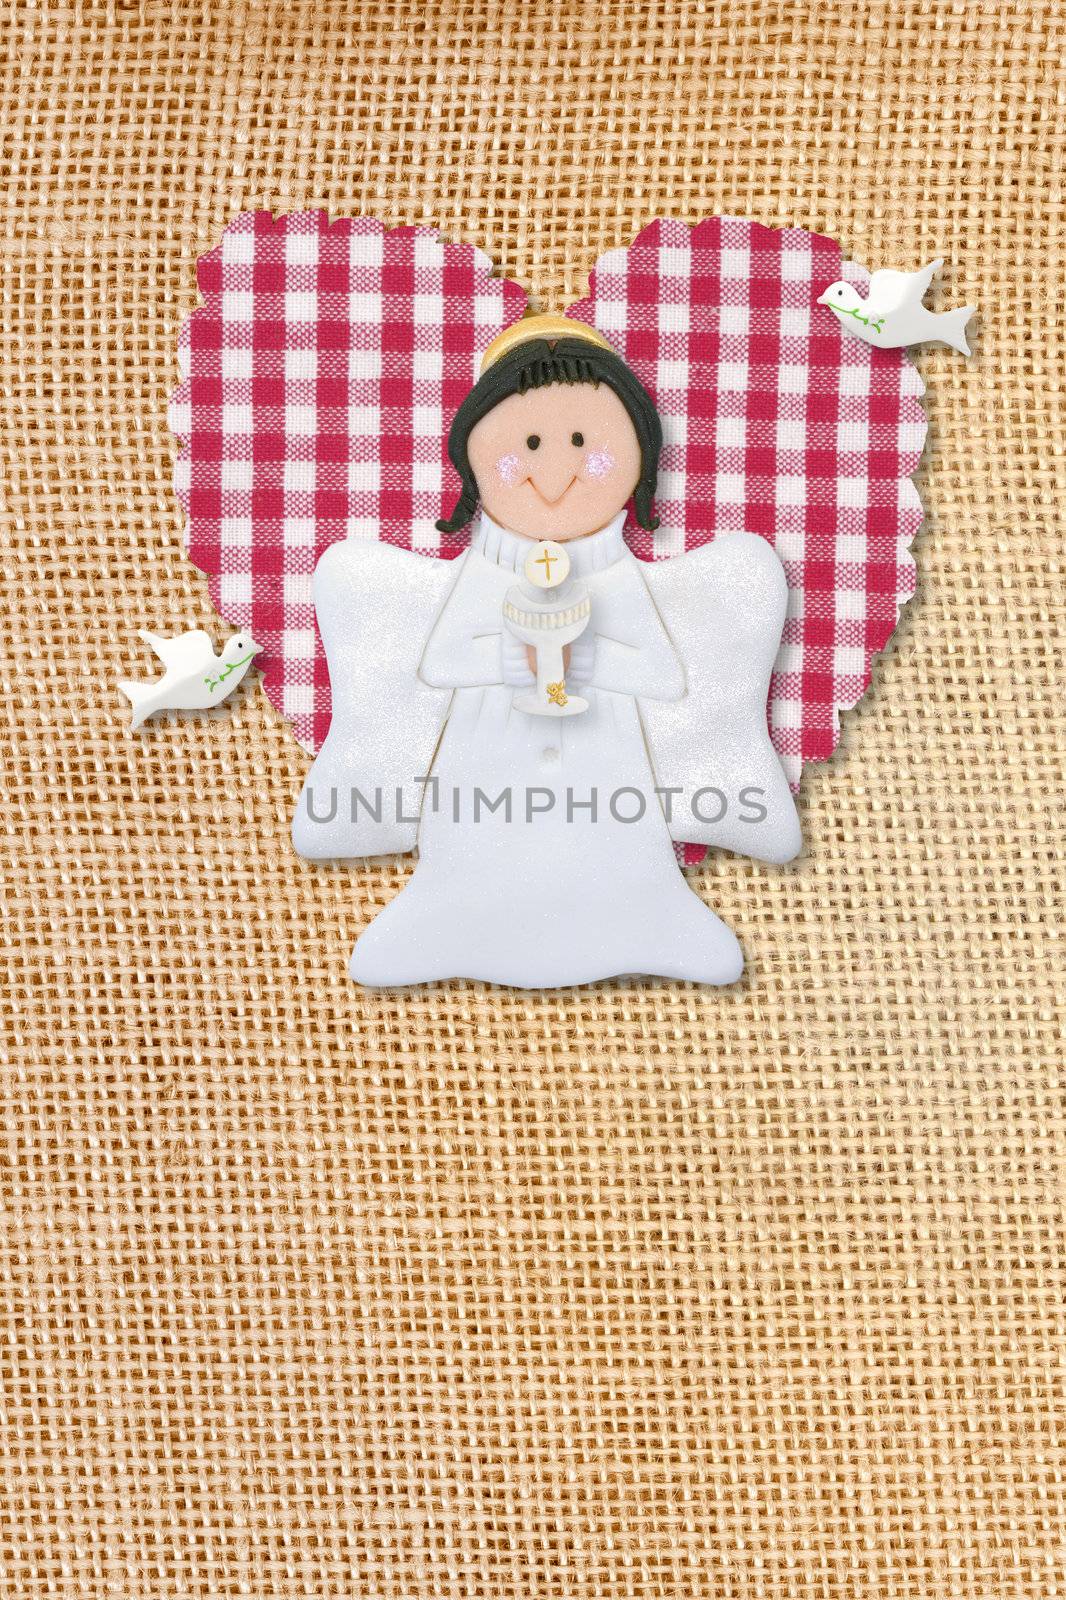 cheerful first communion card, angel in rustic background by Carche